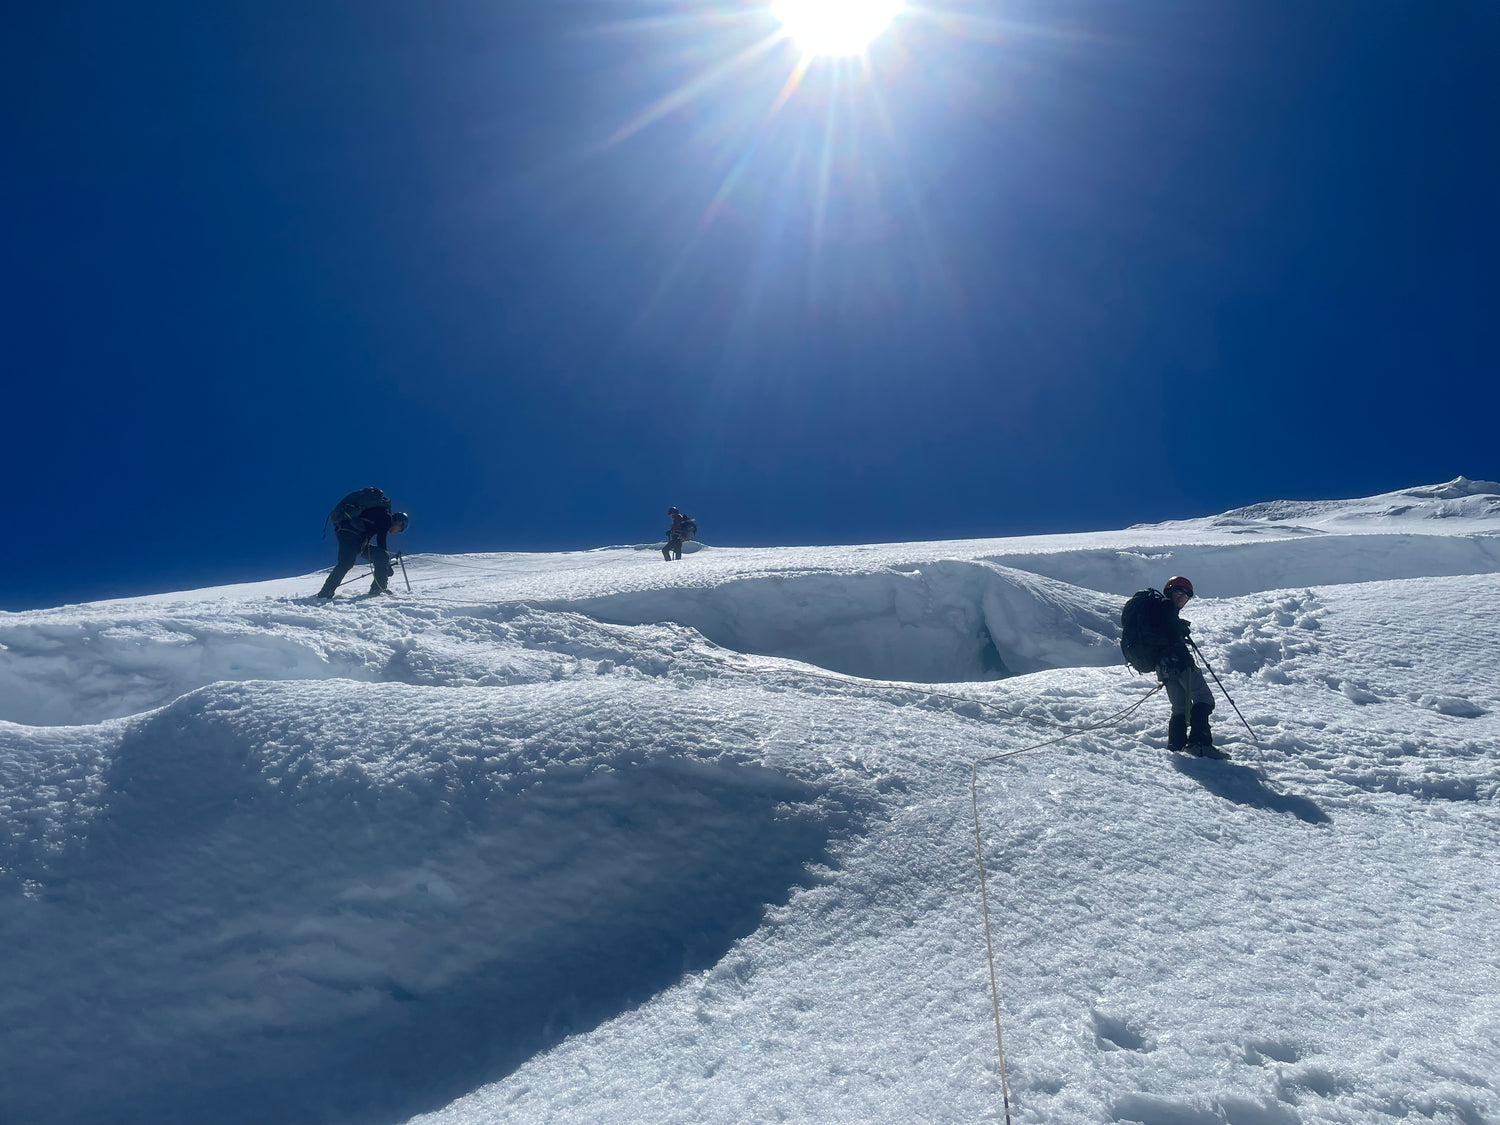 the team navigates through crevasses with a rope to protect an unexpected fall